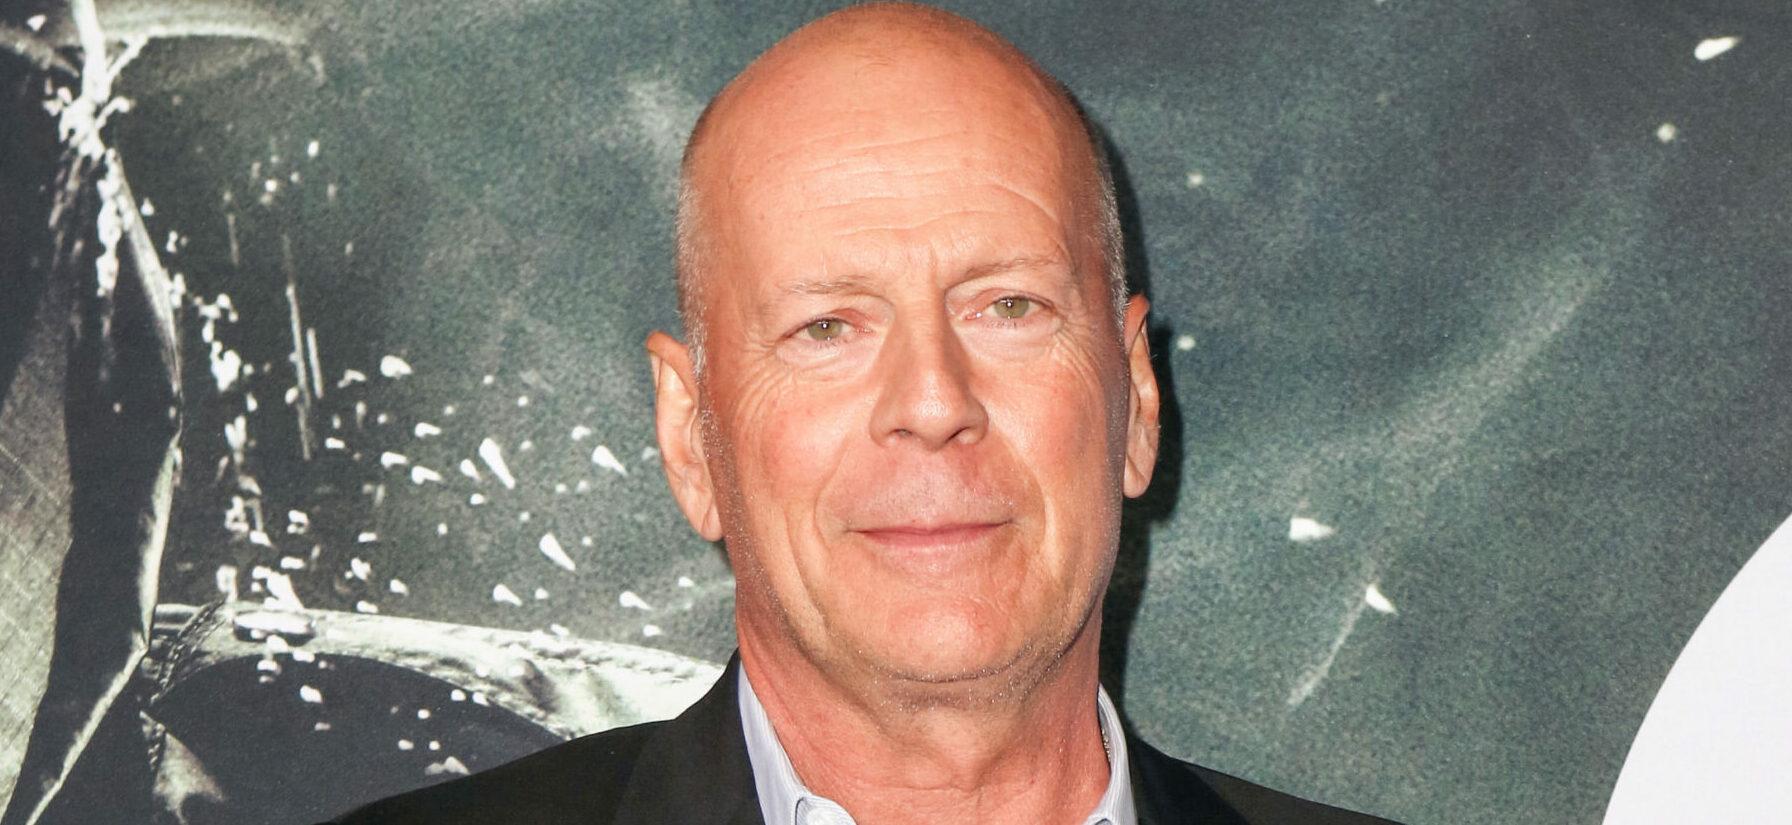 Bruce Willis Looks Somber During Rare Public Outing Amid News Of The Loss Of His ‘Language Skills’